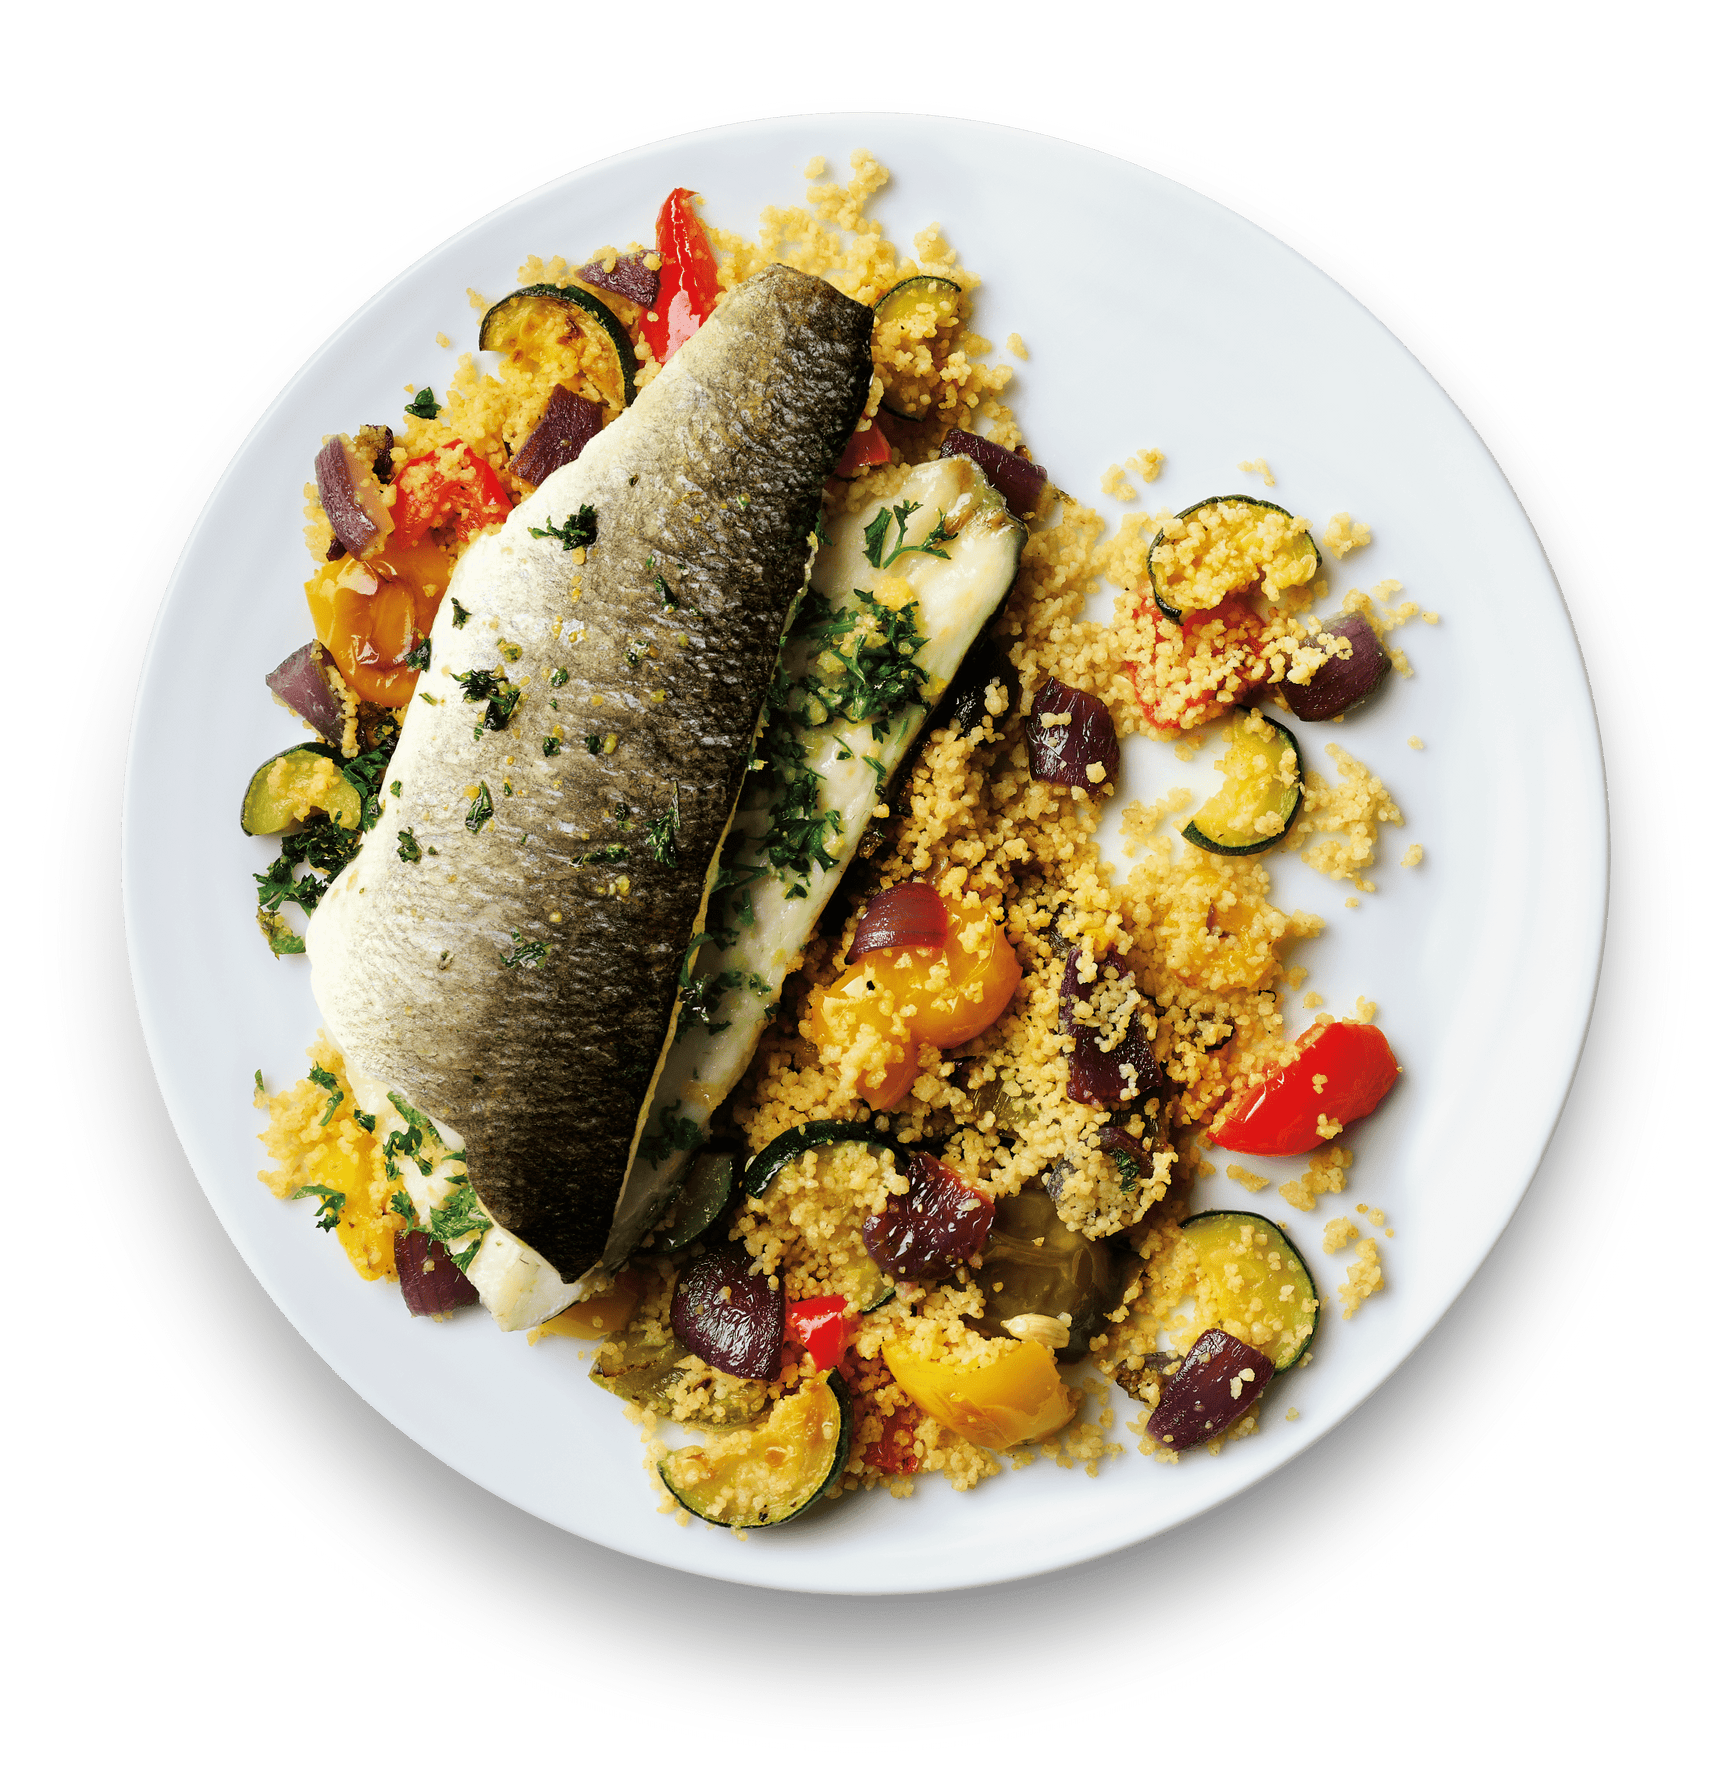 Fred's butterflied sea bass served with couscous and roasted vegetables